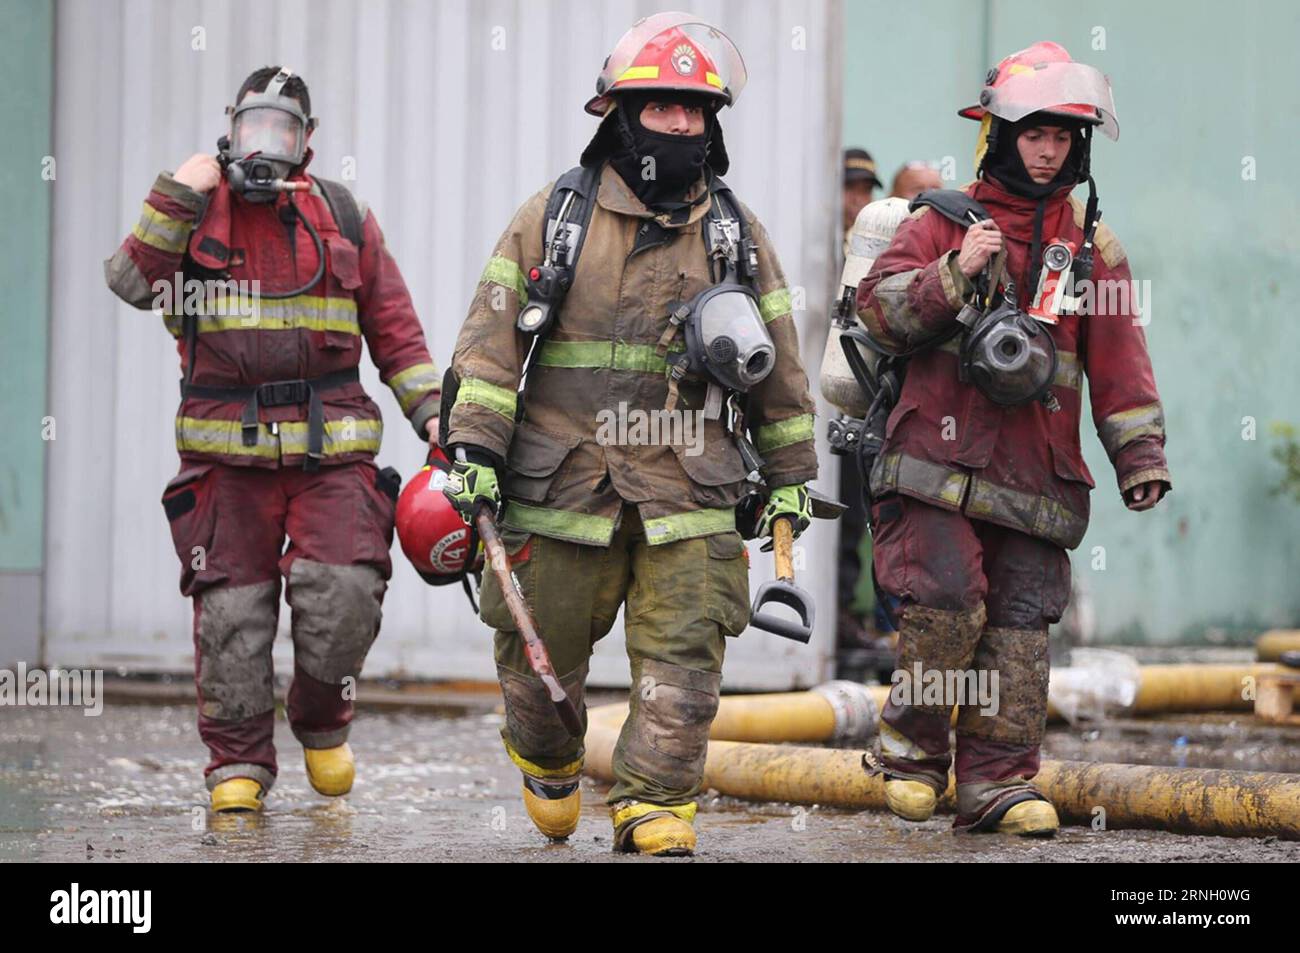 Peru: Brand in einer Schuhfabrik in Lima (161019) -- LIMA, Oct. 19, 2016 -- Firefighters work at the site of a fire in a shoe factory in El Agustino district, in Lima, Peru, on Oct. 19, 2016. Three firefighters reportedly missing in a fire that started on Tuesday night at a shoe factory in Lima were found dead under the debris of the plant. ) (jg) (fnc) (ce) PERU-LIMA-ACCIDENT-FIRE ANDINA PUBLICATIONxNOTxINxCHN   Peru Brand in a Shoe factory in Lima  Lima OCT 19 2016 Firefighters Work AT The Site of a Fire in a Shoe Factory in El Agustino District in Lima Peru ON OCT 19 2016 Three Firefighters Stock Photo